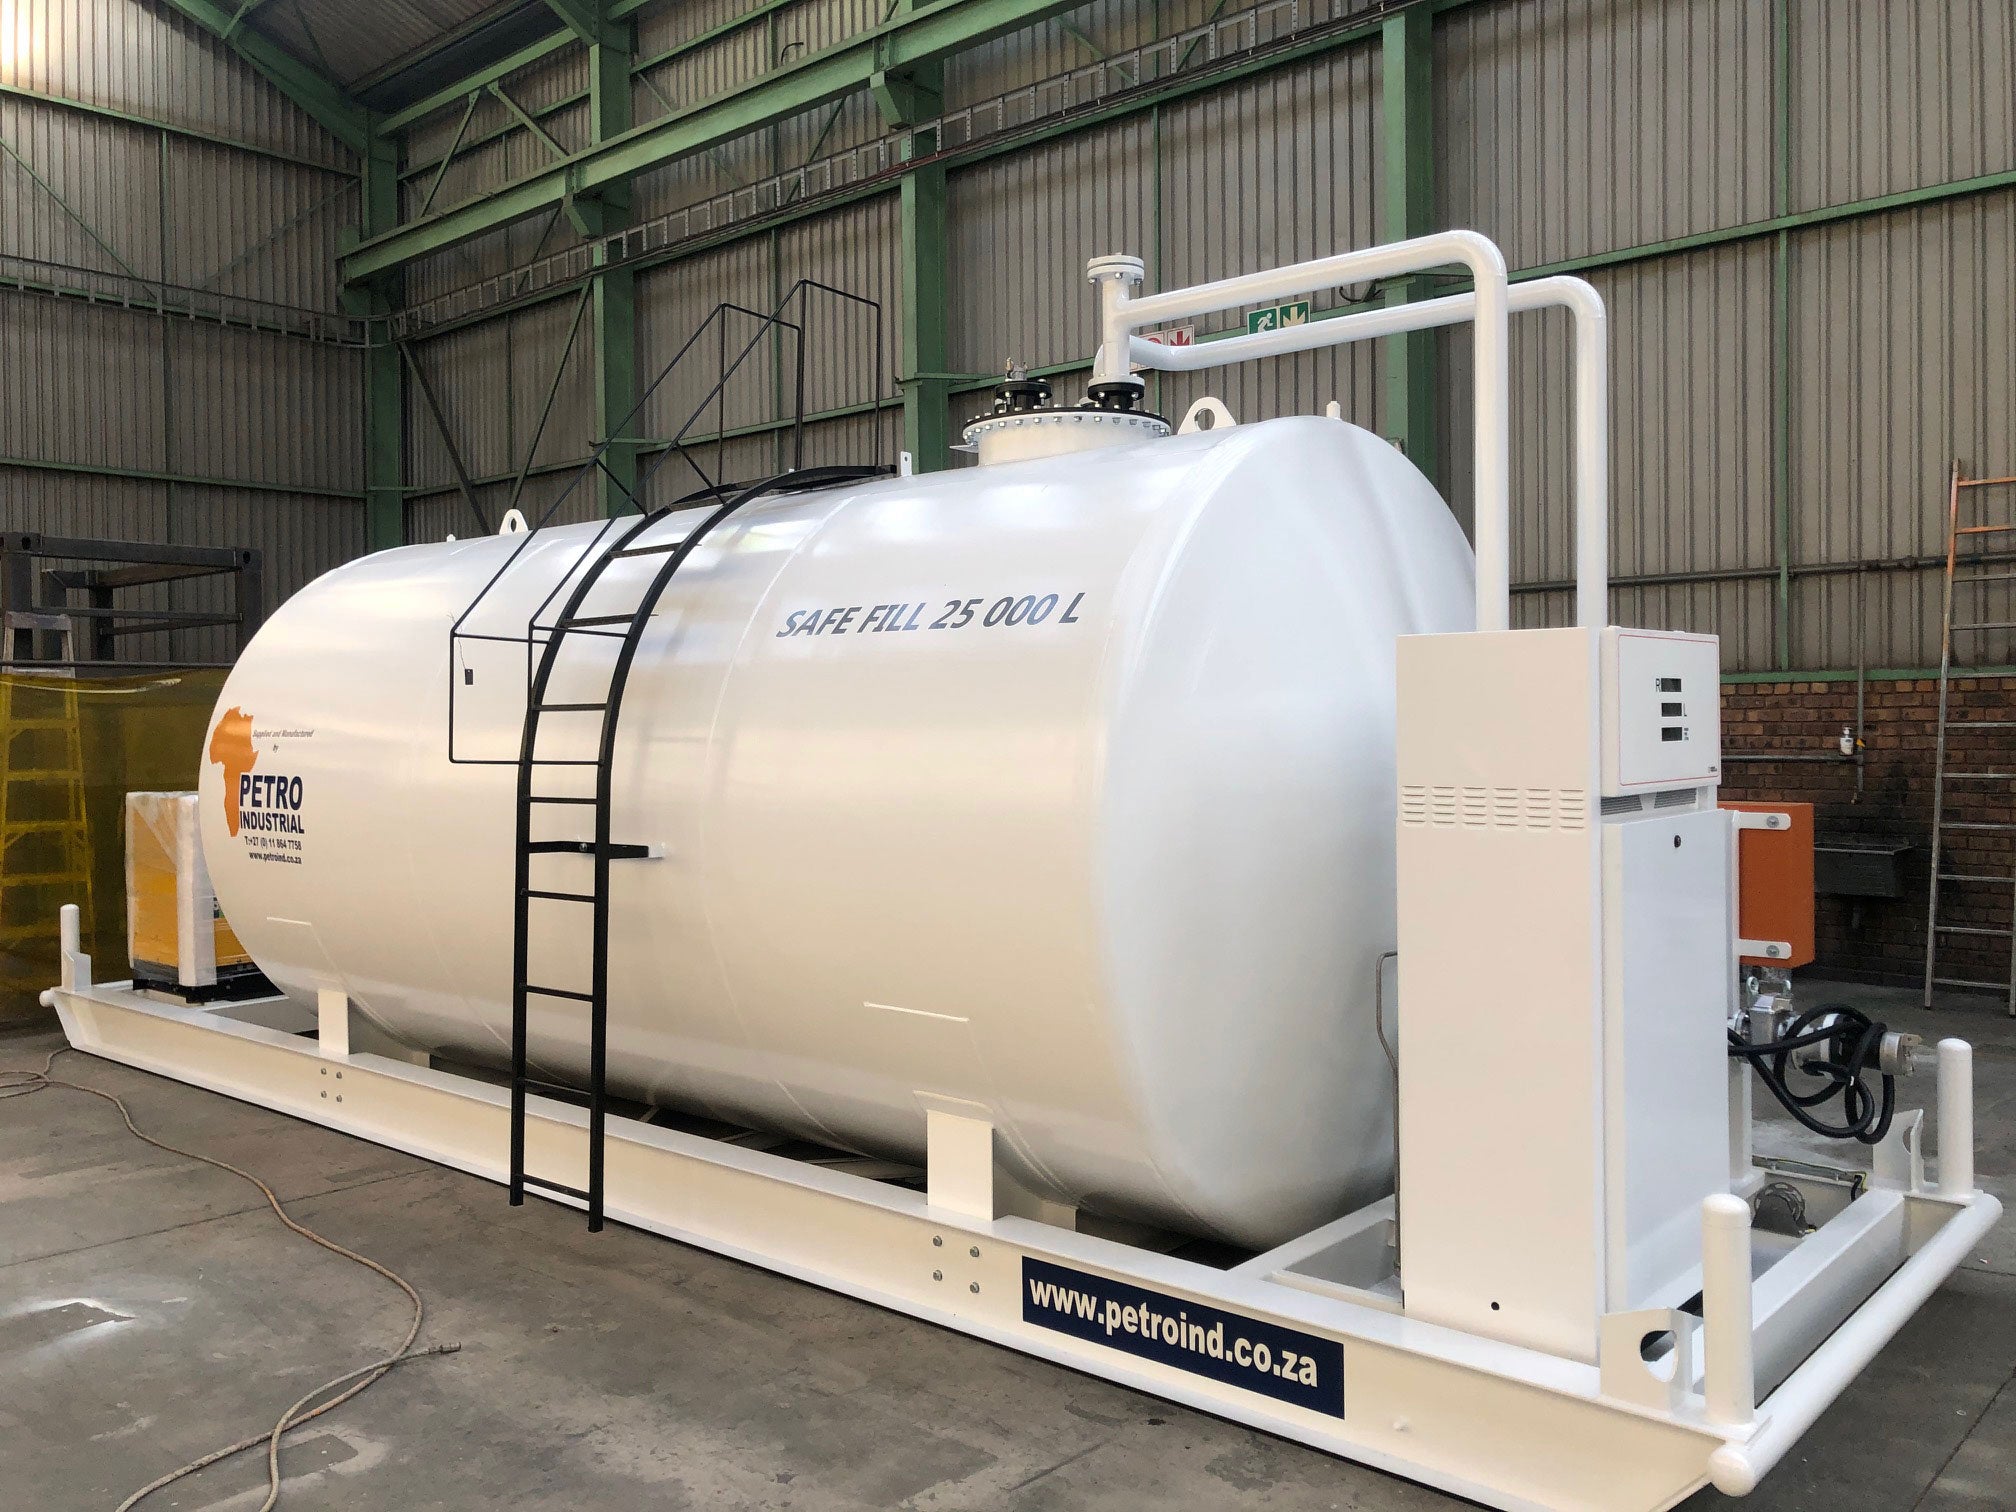 PETRO Industrial Cylindrical Fuel Storage Tank with Generator and Bowser